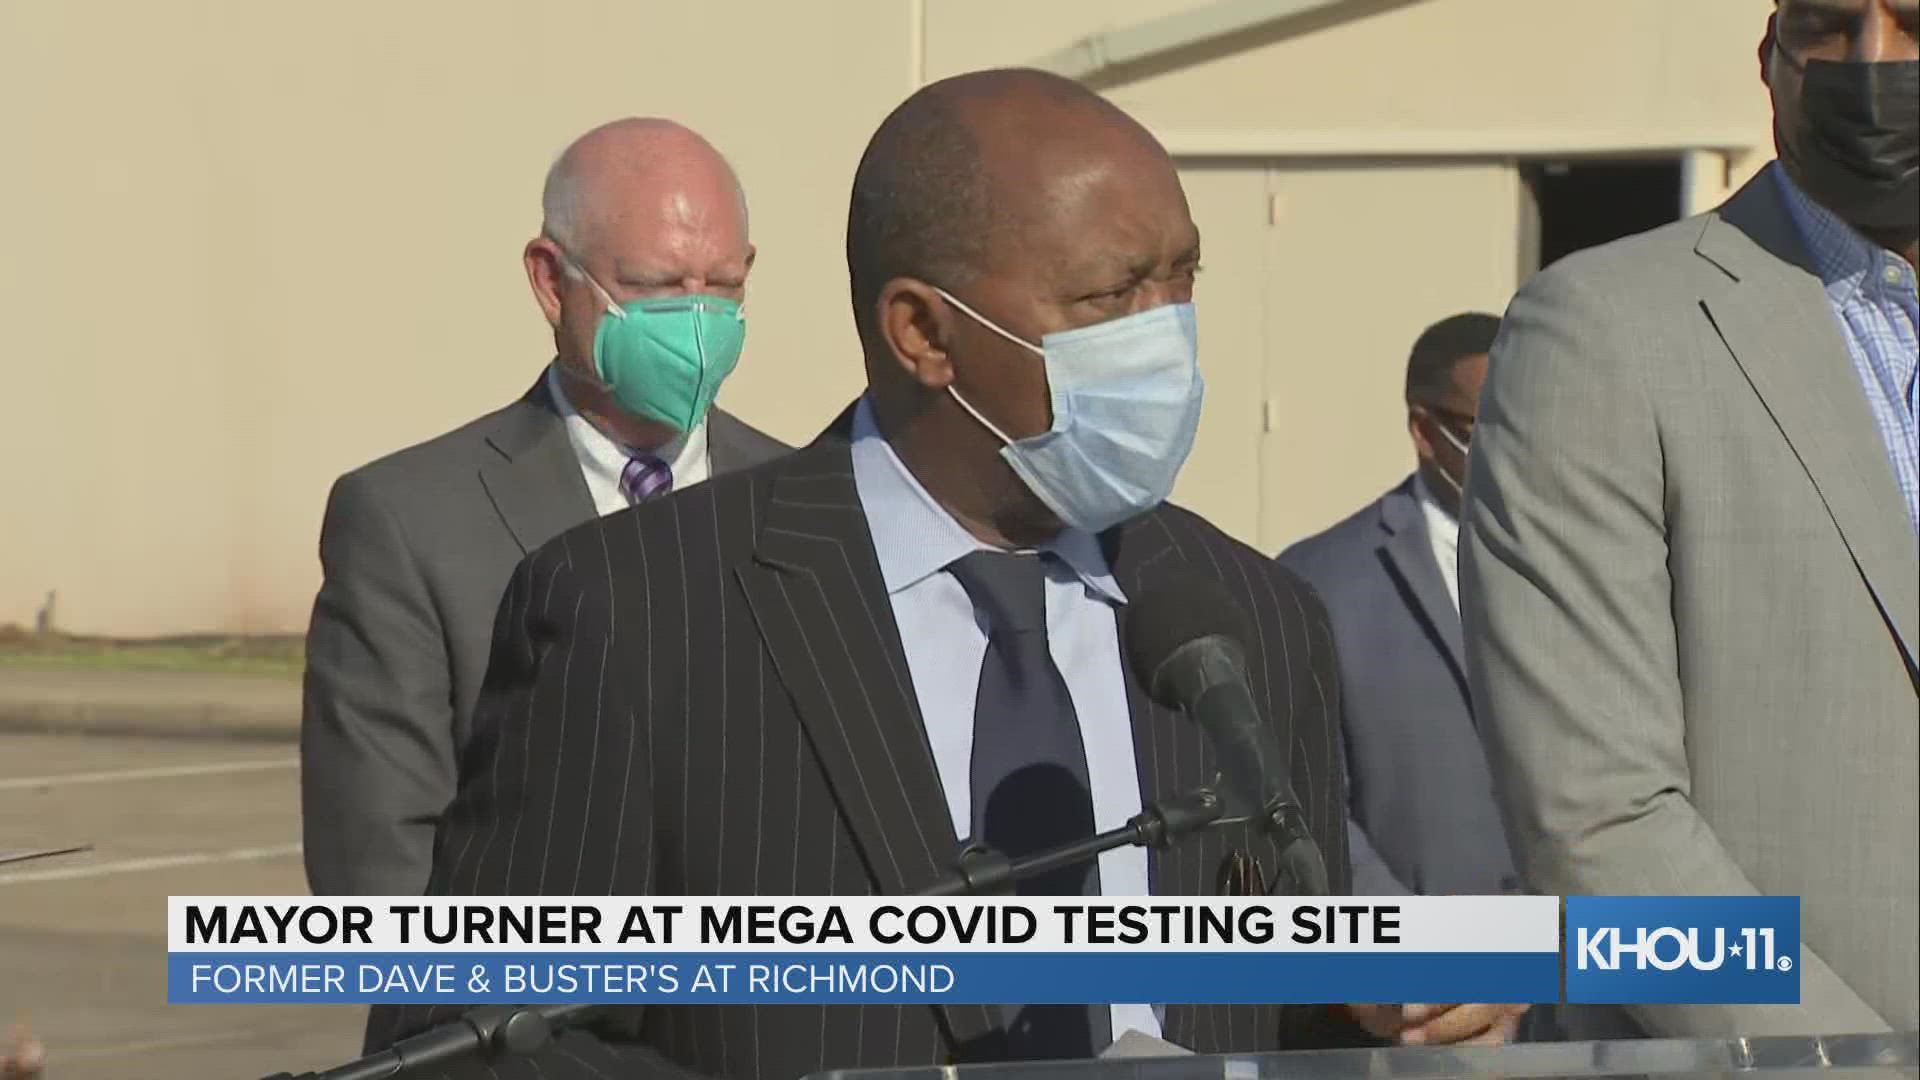 Mayor Turner stopped by the newest COVID-19 mega site in the Galleria area to encourage Houstonians to get tested regularly.